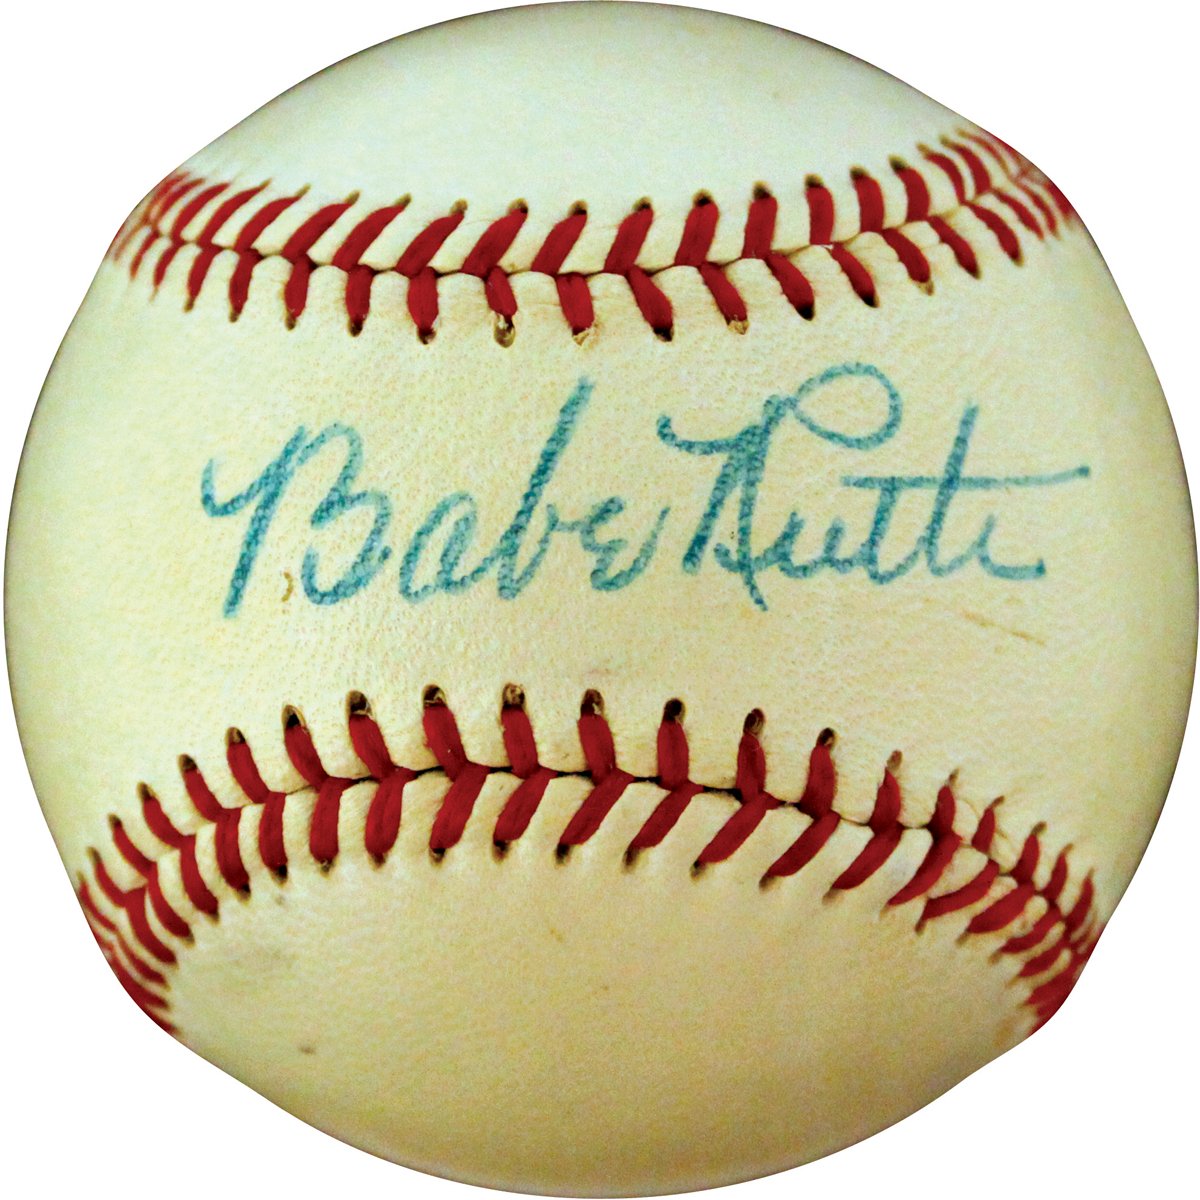 High Grade Autographed Babe Ruth Baseball Sells for $97,0001200 x 1200